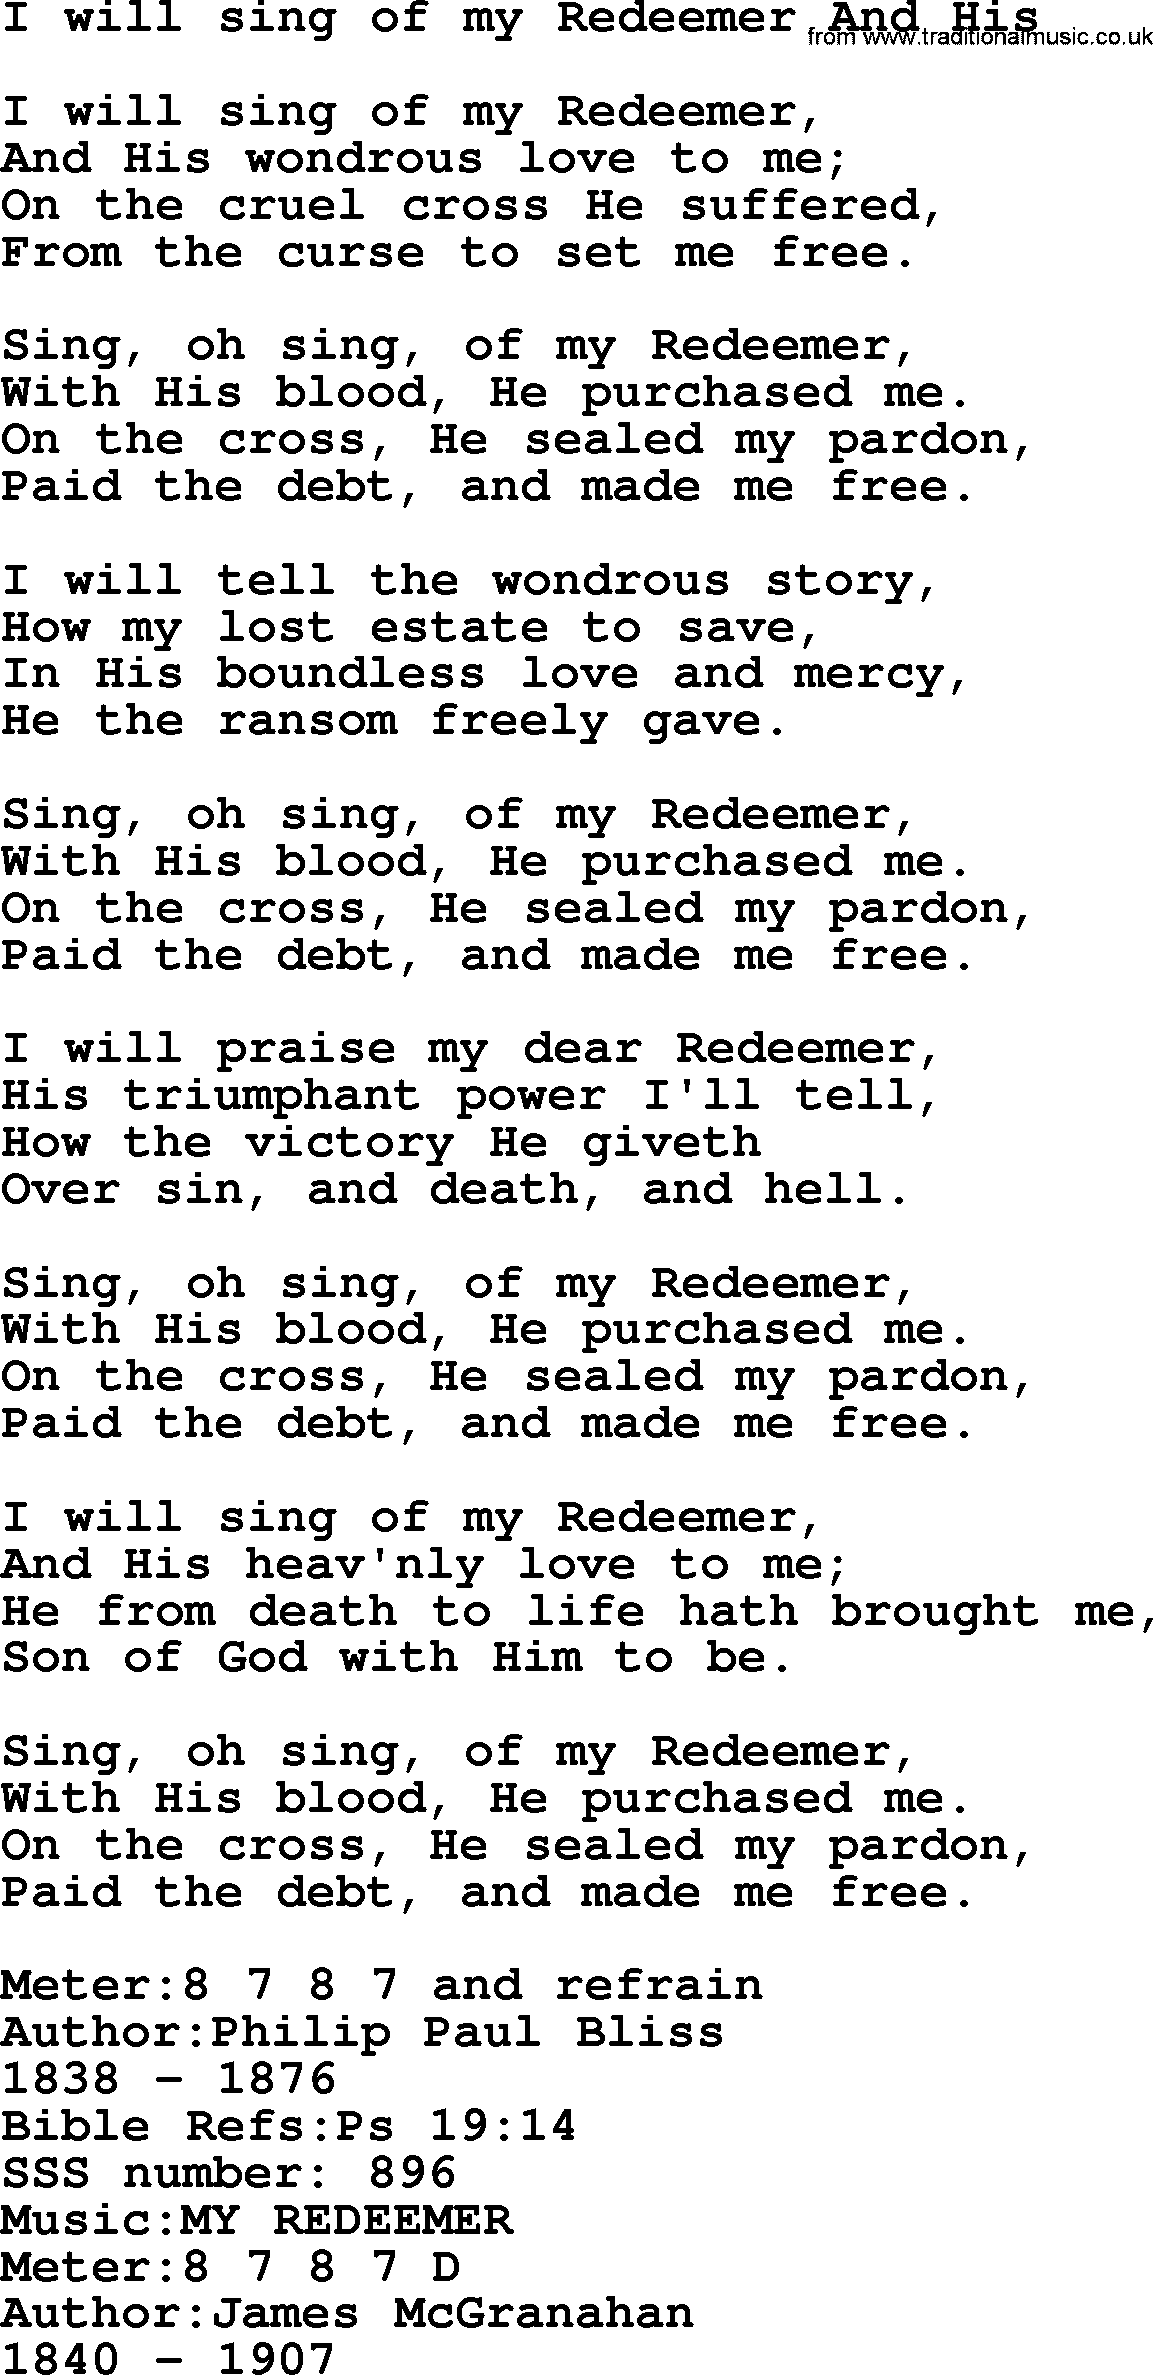 Sacred Songs and Solos complete, 1200 Hymns, title: I Will Sing Of My Redeemer And His, lyrics and PDF